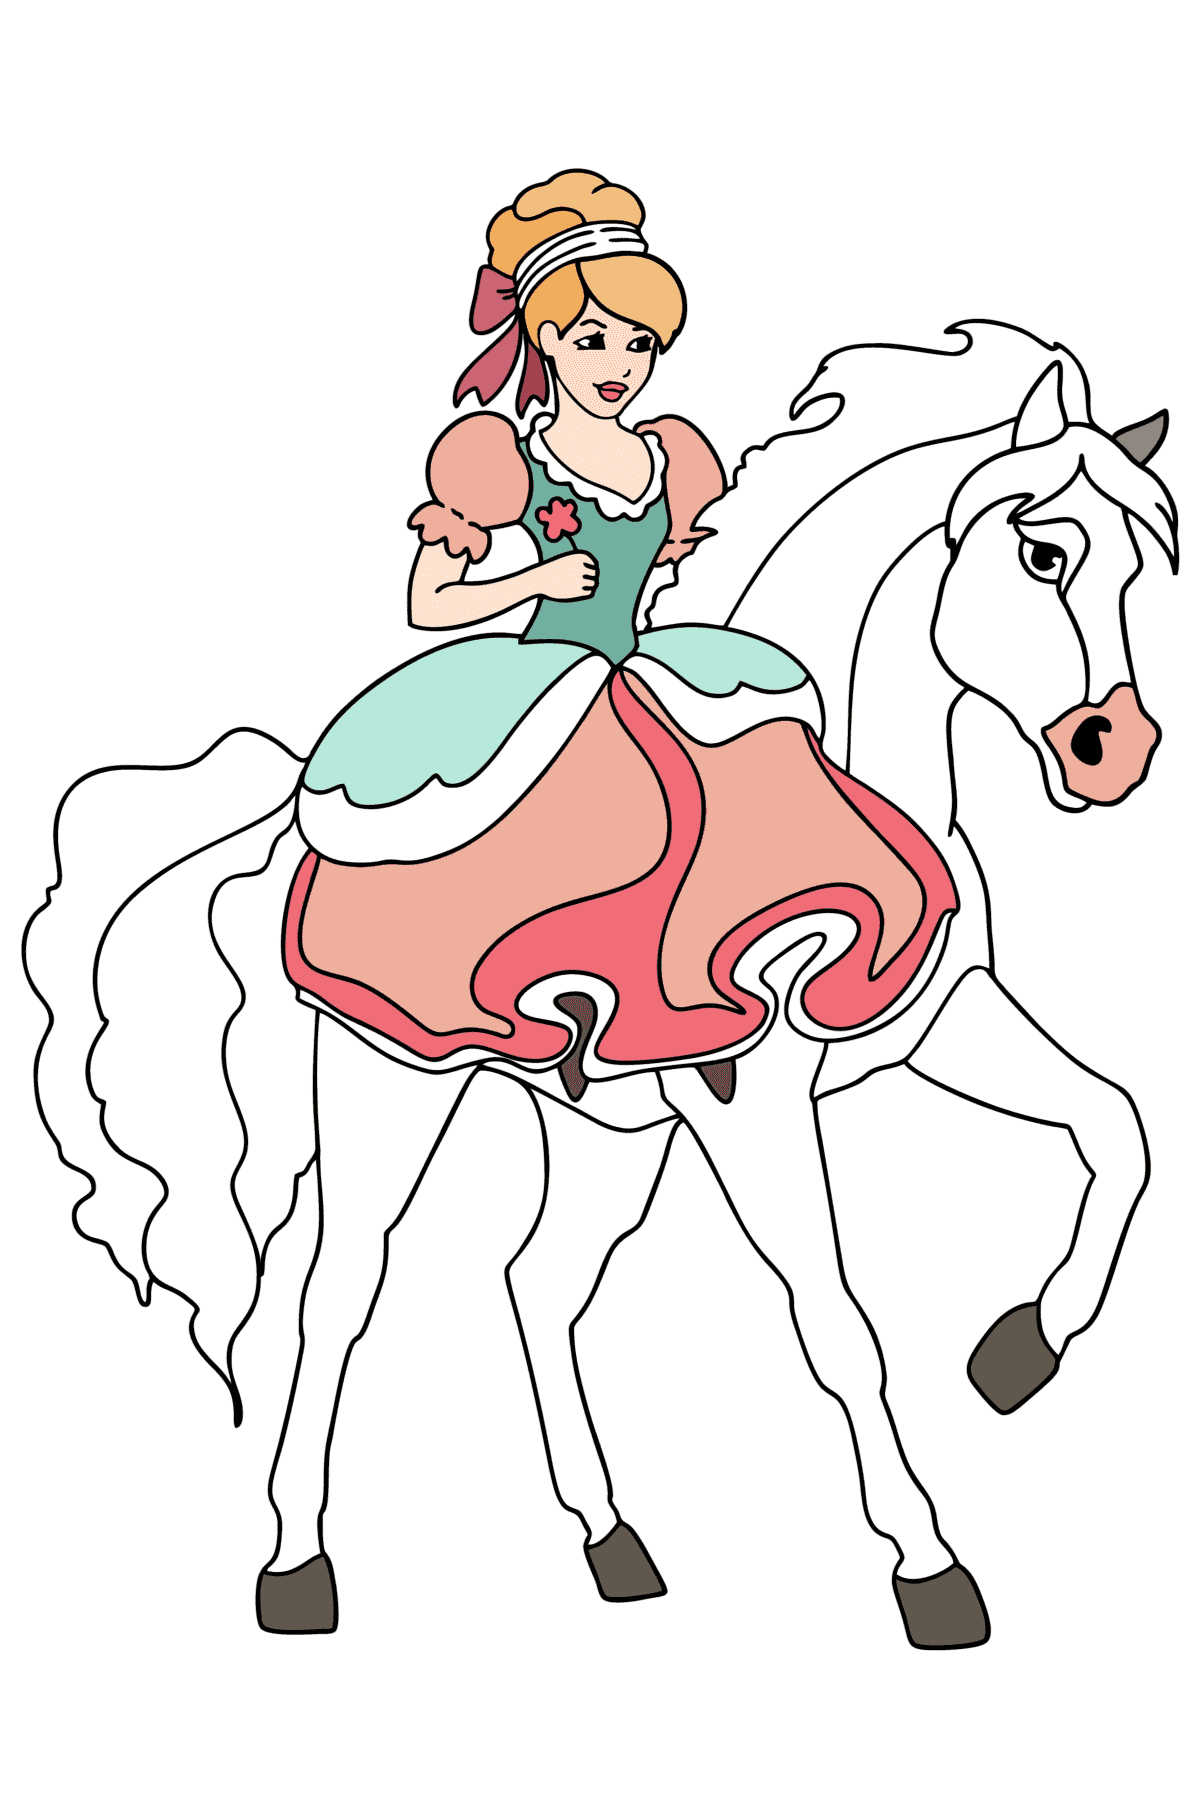 Princess on horse сoloring page - Coloring Pages for Kids